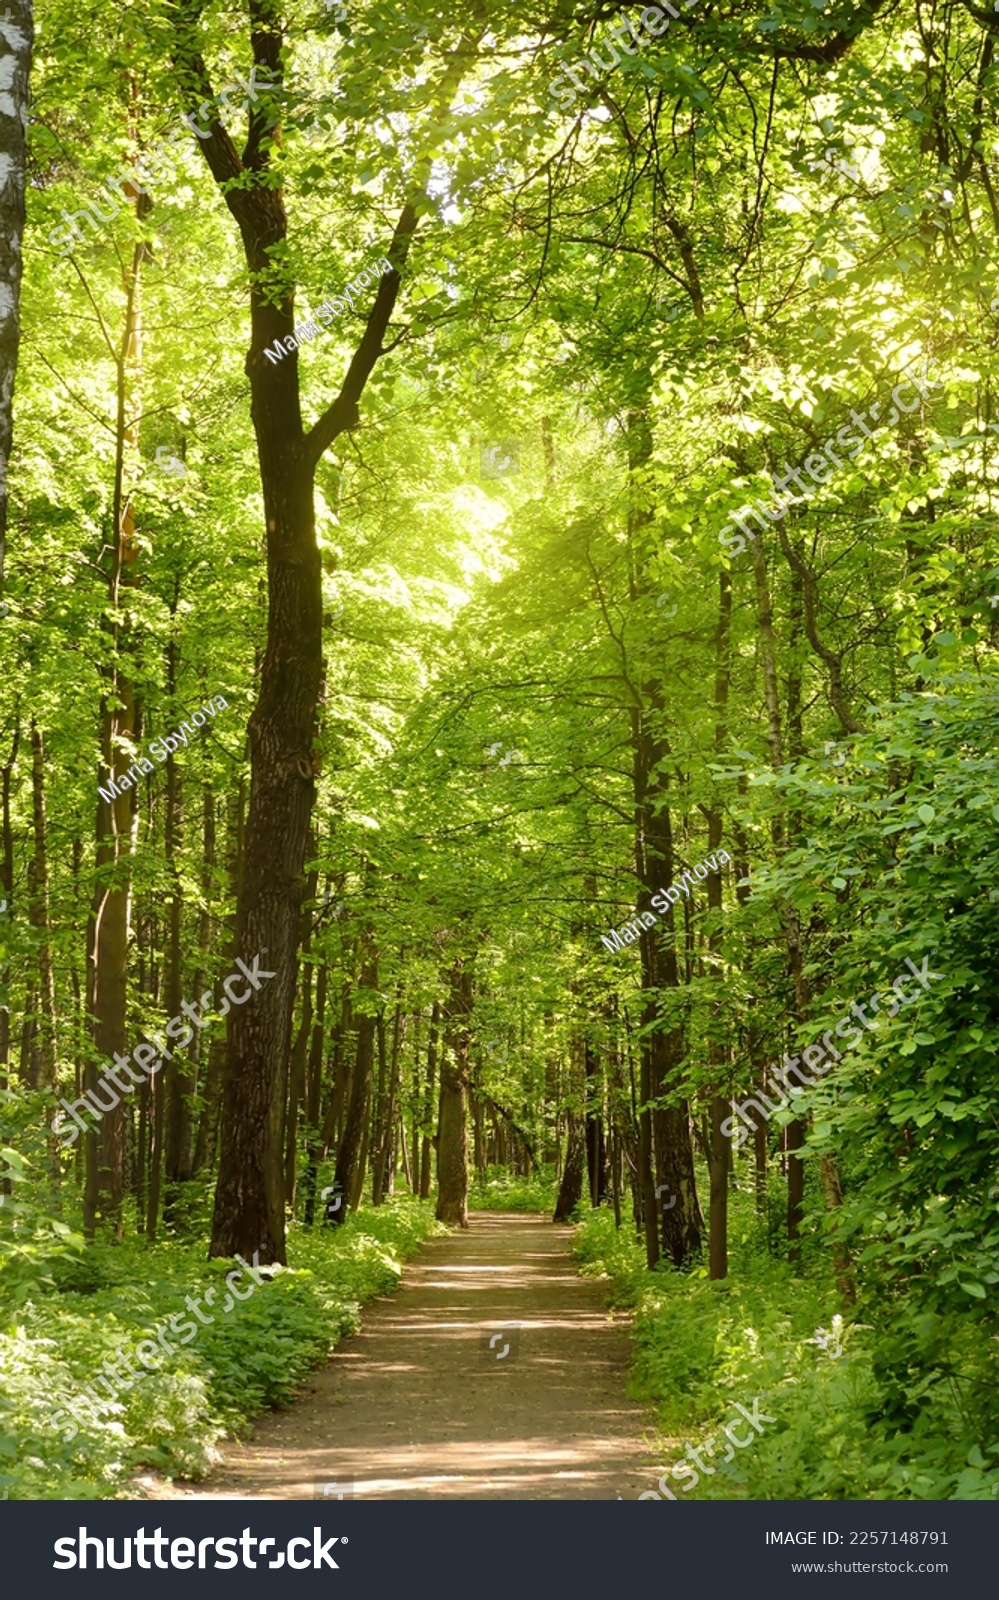 A path through a green sunny spring forest, illuminated by sunlight. Beauty of nature. #2257148791